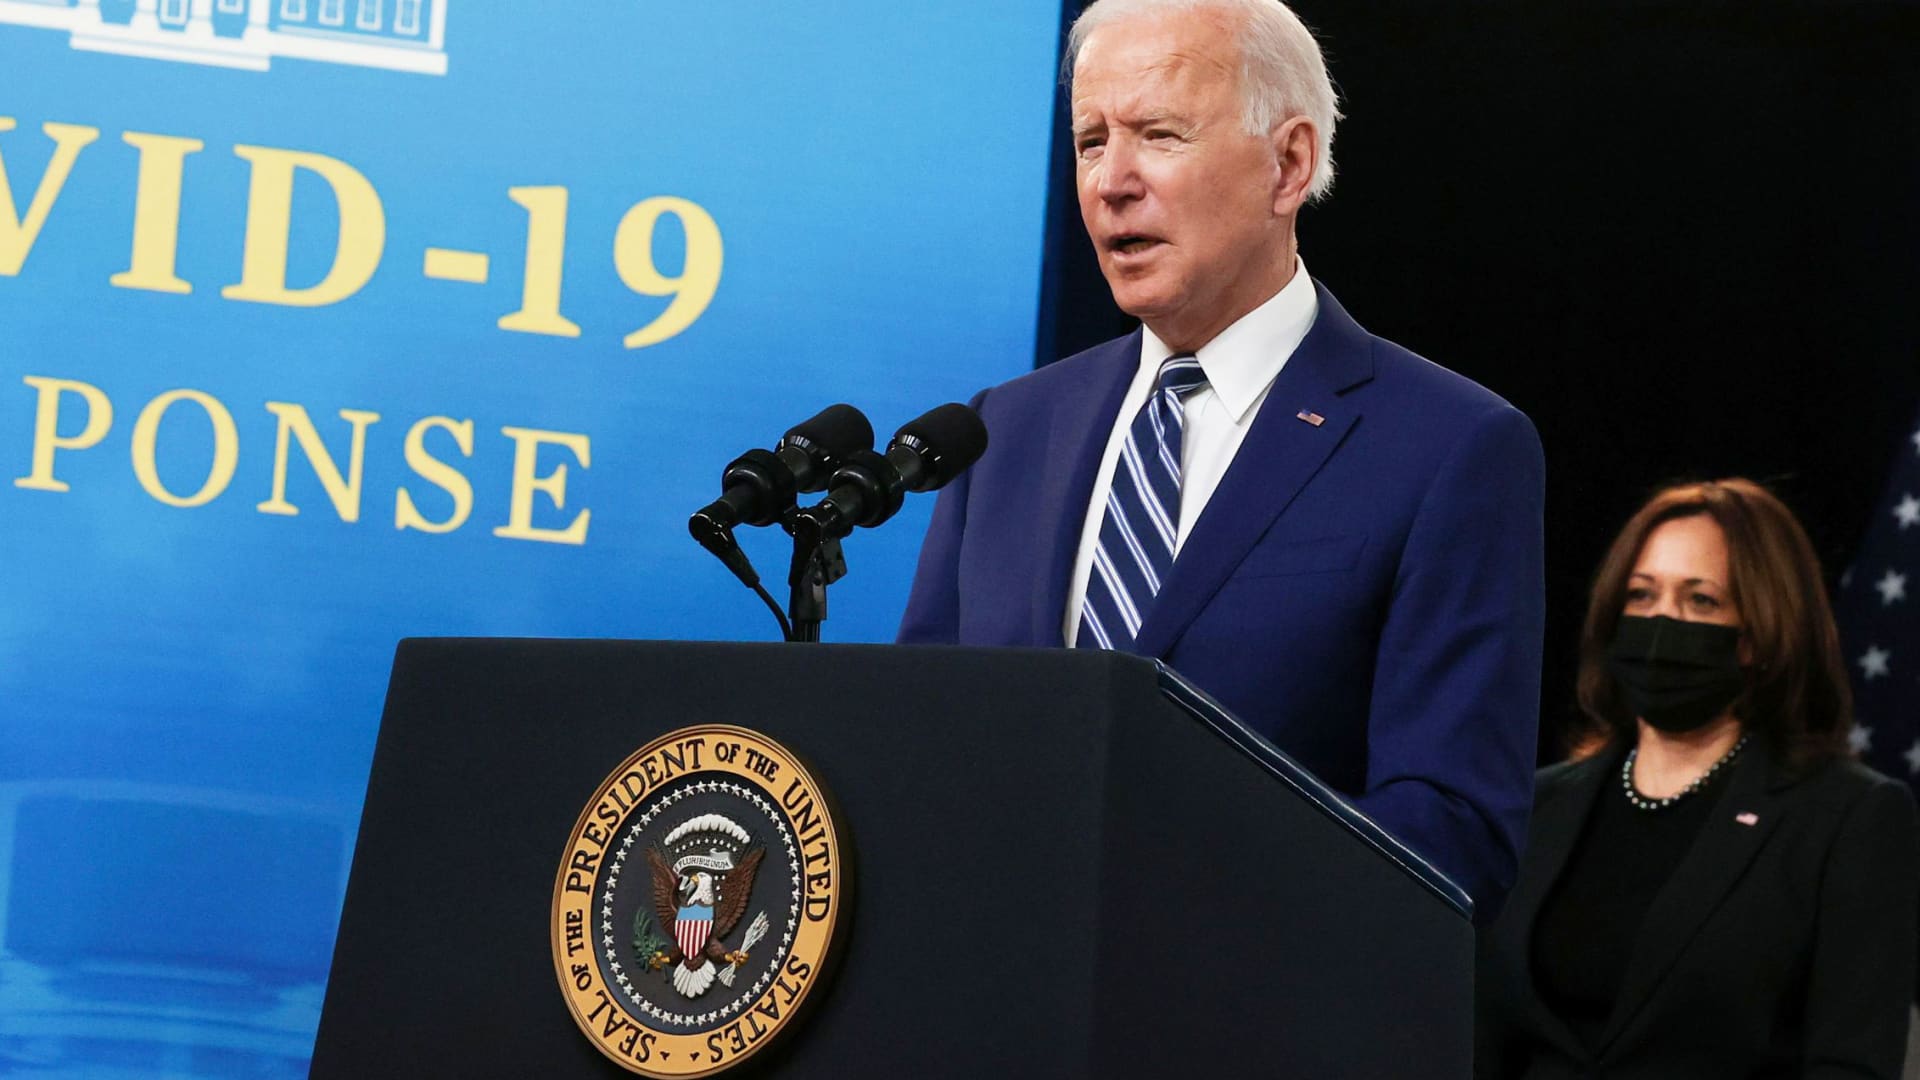 U.S. President Joe Biden, ‪with Vice President Kamala Harris,‬ delivers remarks after a meeting with his COVID-19 Response Team on the coronavirus disease (COVID-19) pandemic and the state of vaccinations, on the White House campus in Washington, March 29, 2021.